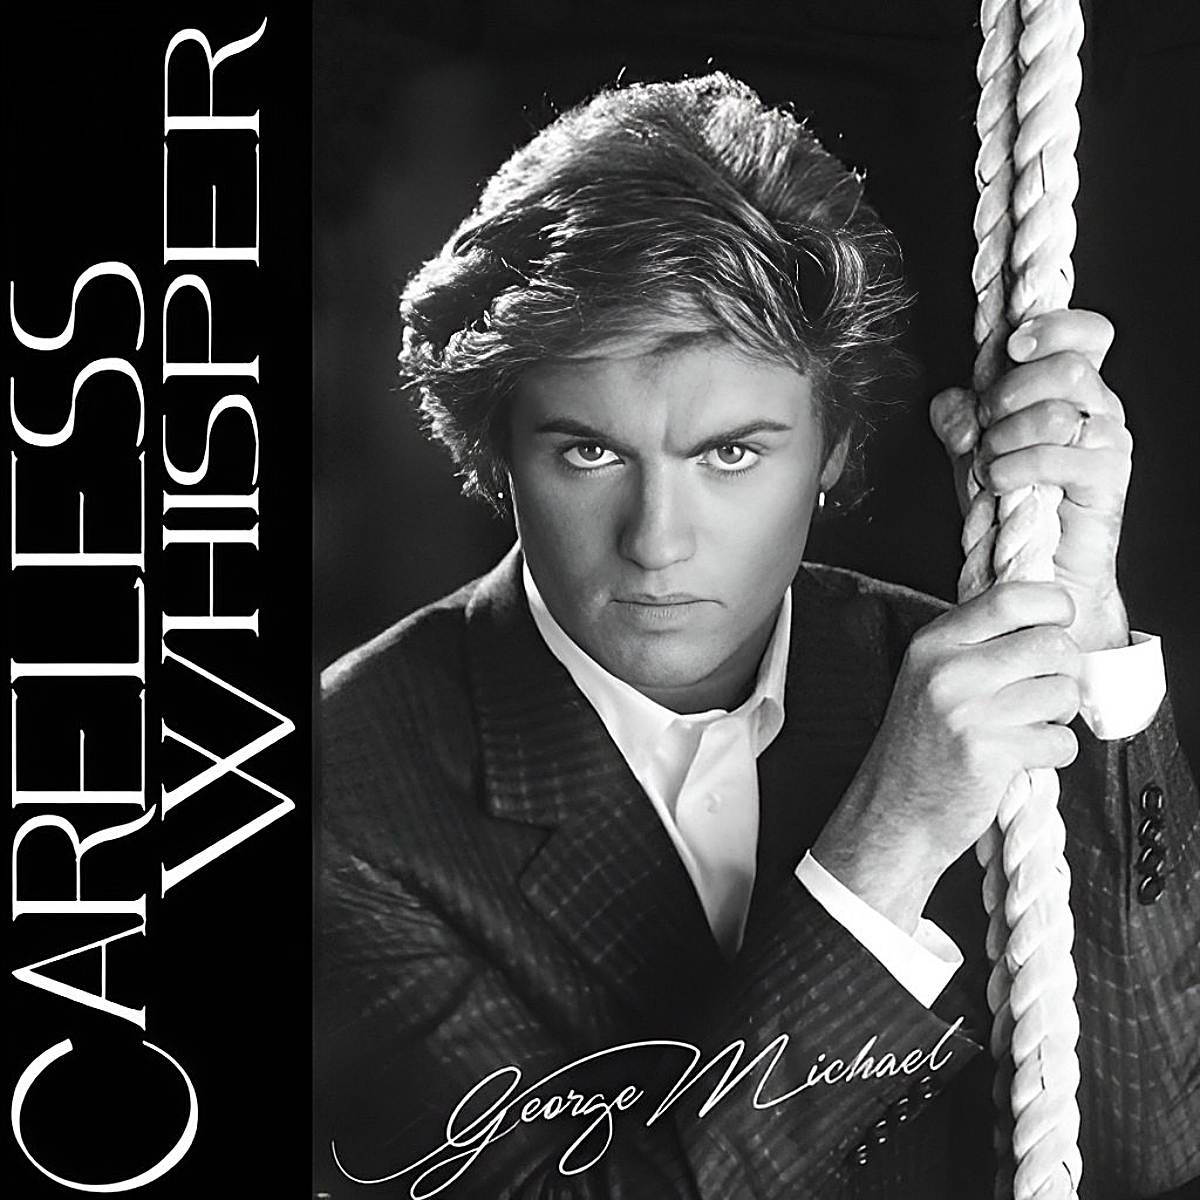 George Michael on the cover of the song "Careless Whisper."